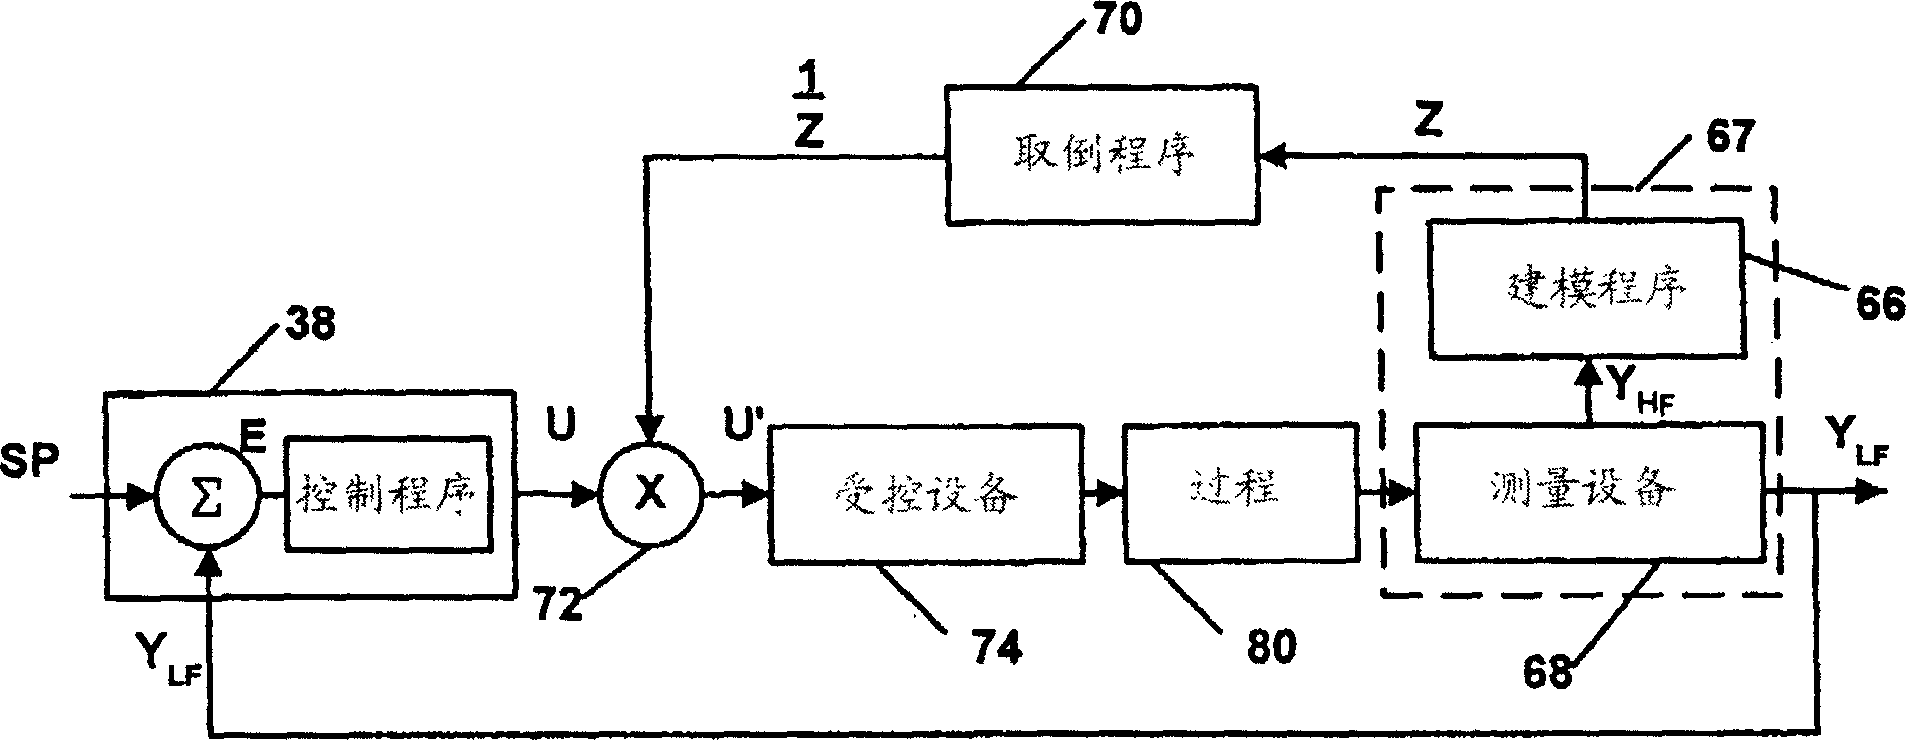 Anticipatory high frequency noise compensation in a distributed process control system